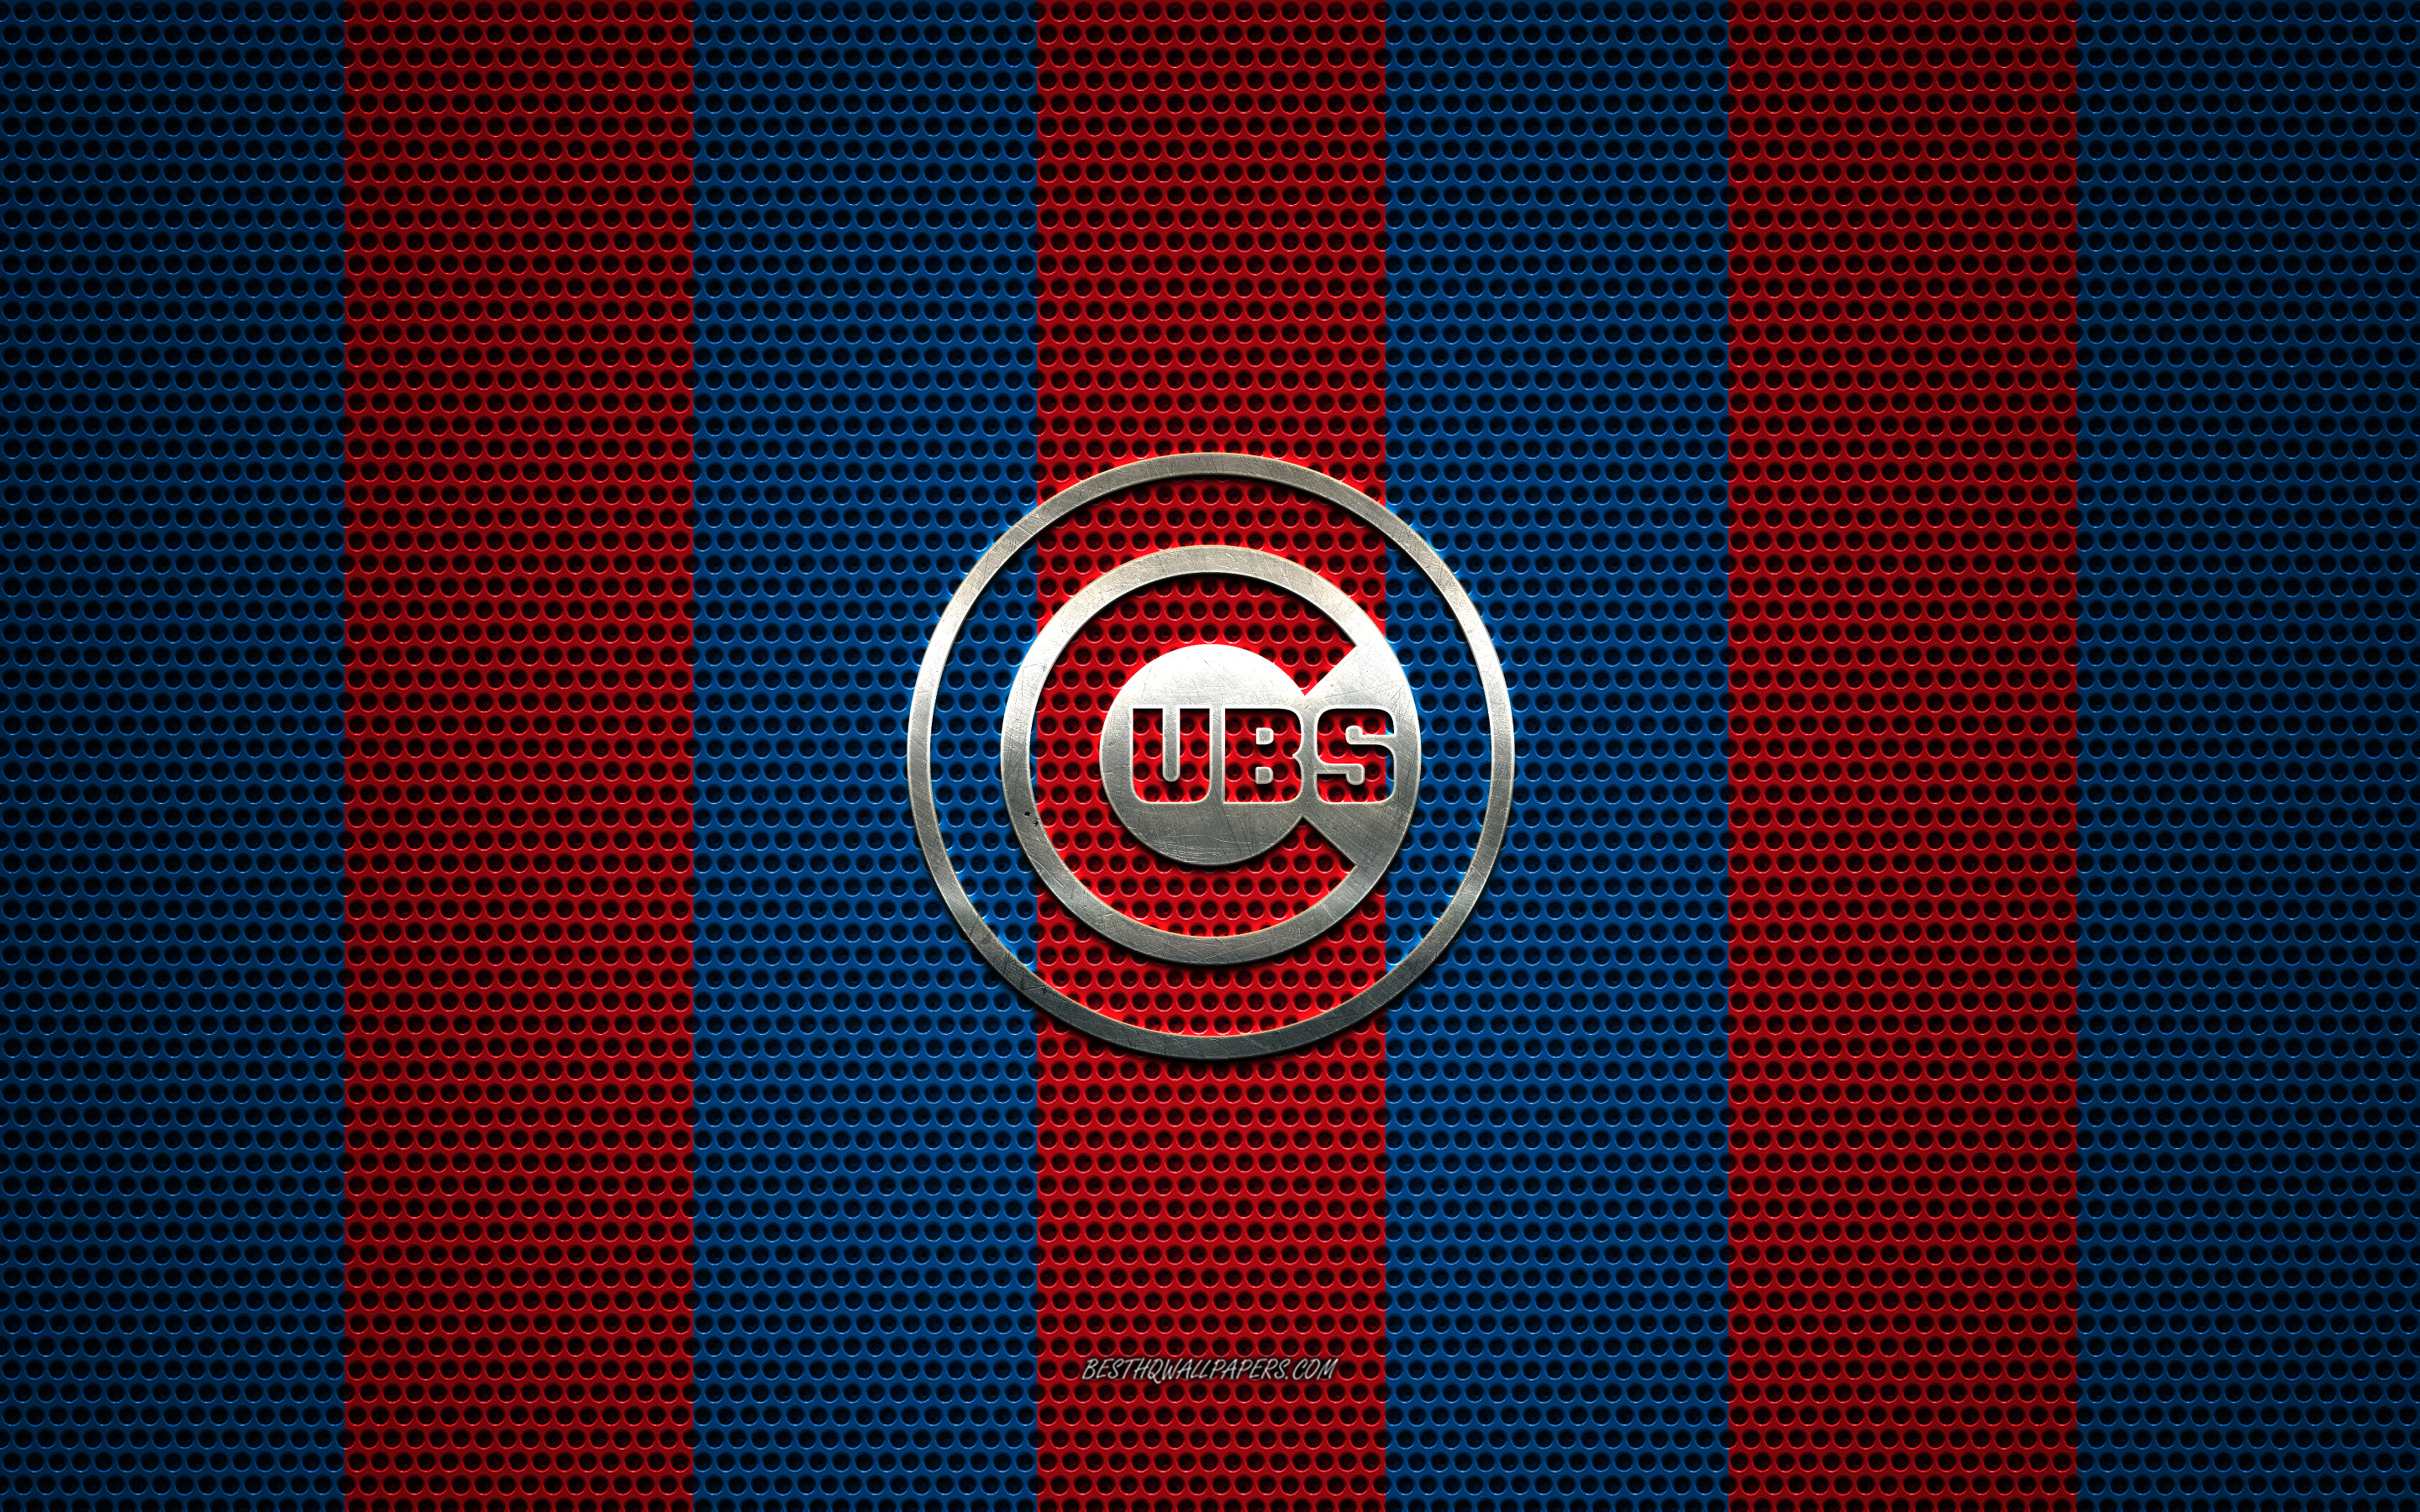 Download wallpaper Chicago Cubs logo, American baseball club, metal emblem, red blue metal mesh background, Chicago Cubs, MLB, Chicago, Illinois, USA, baseball for desktop with resolution 2880x1800. High Quality HD picture wallpaper